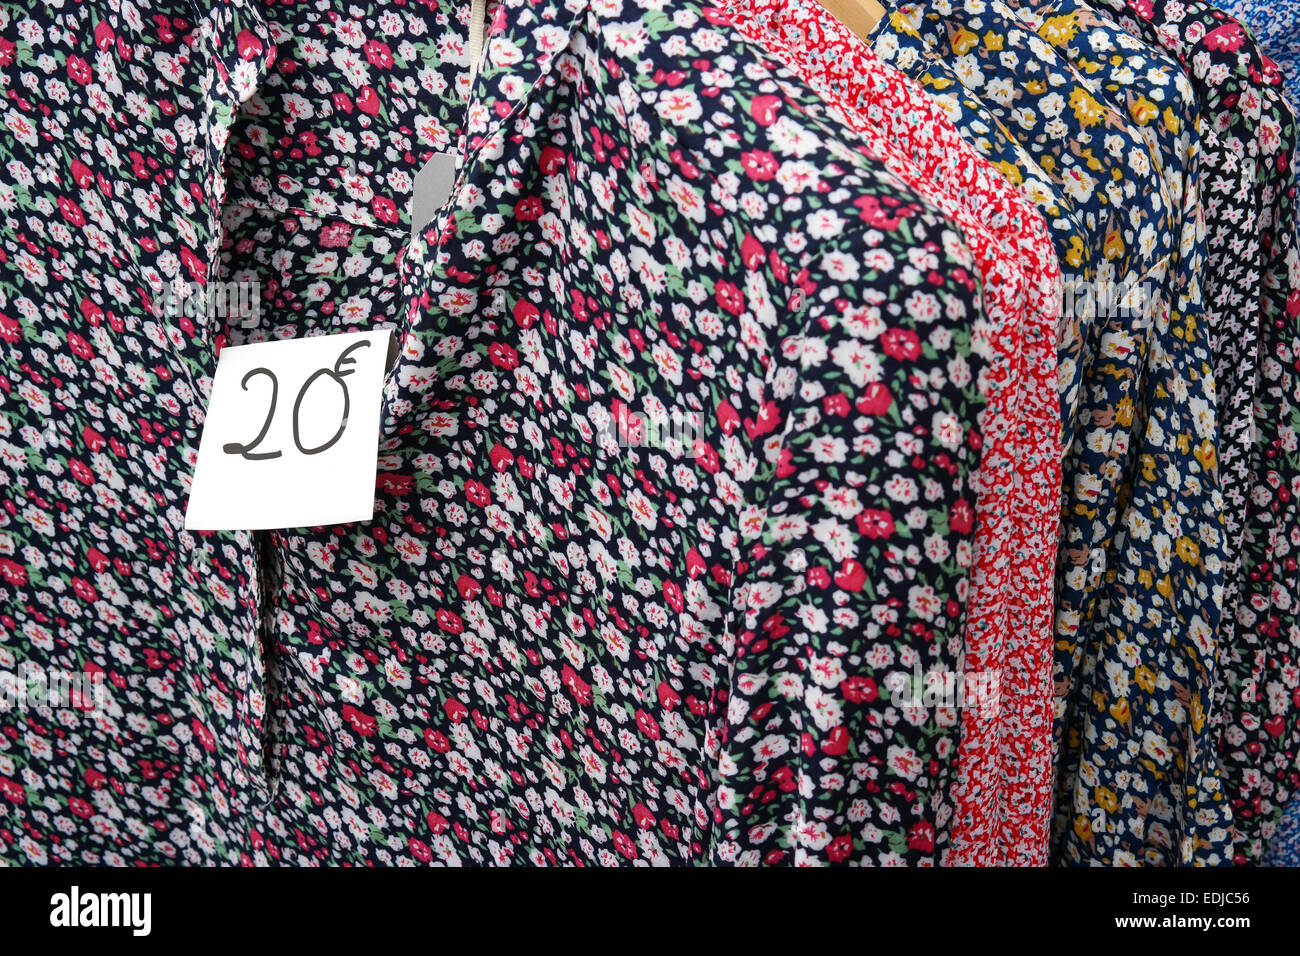 Hand writted price tag on clothes rack with floral dresses at a market stall Stock Photo